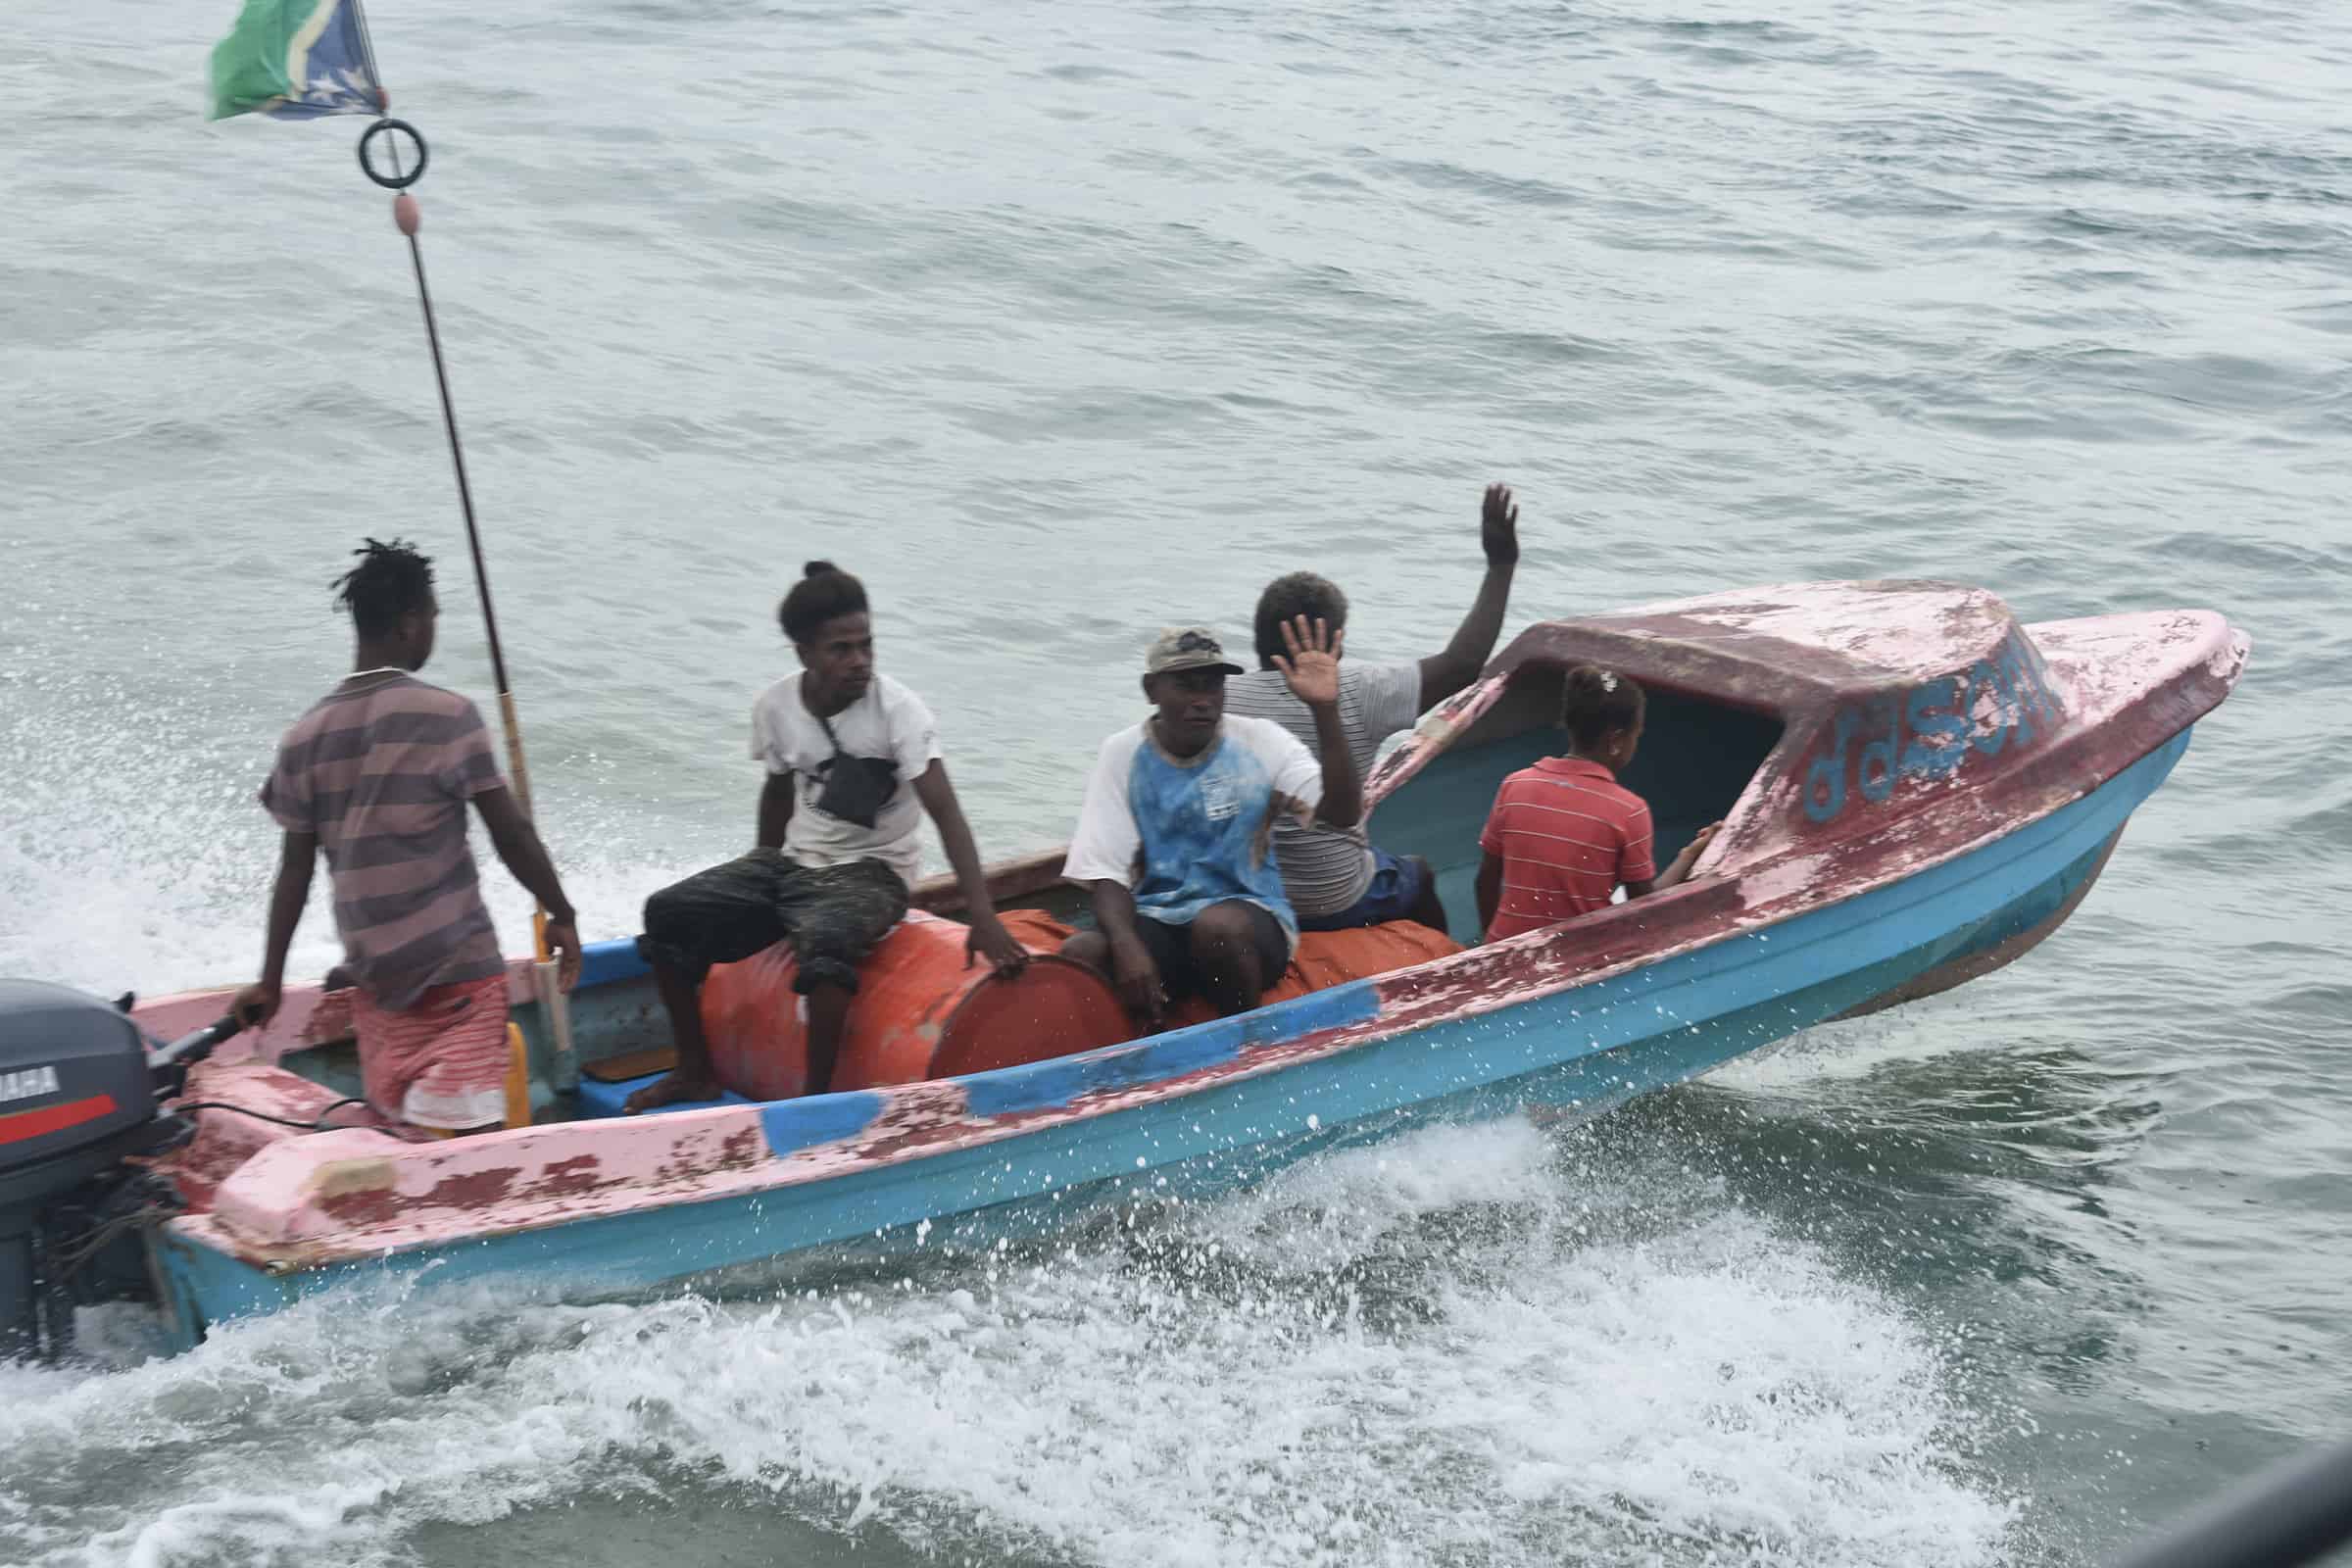 A group of people ride in a boat on a river